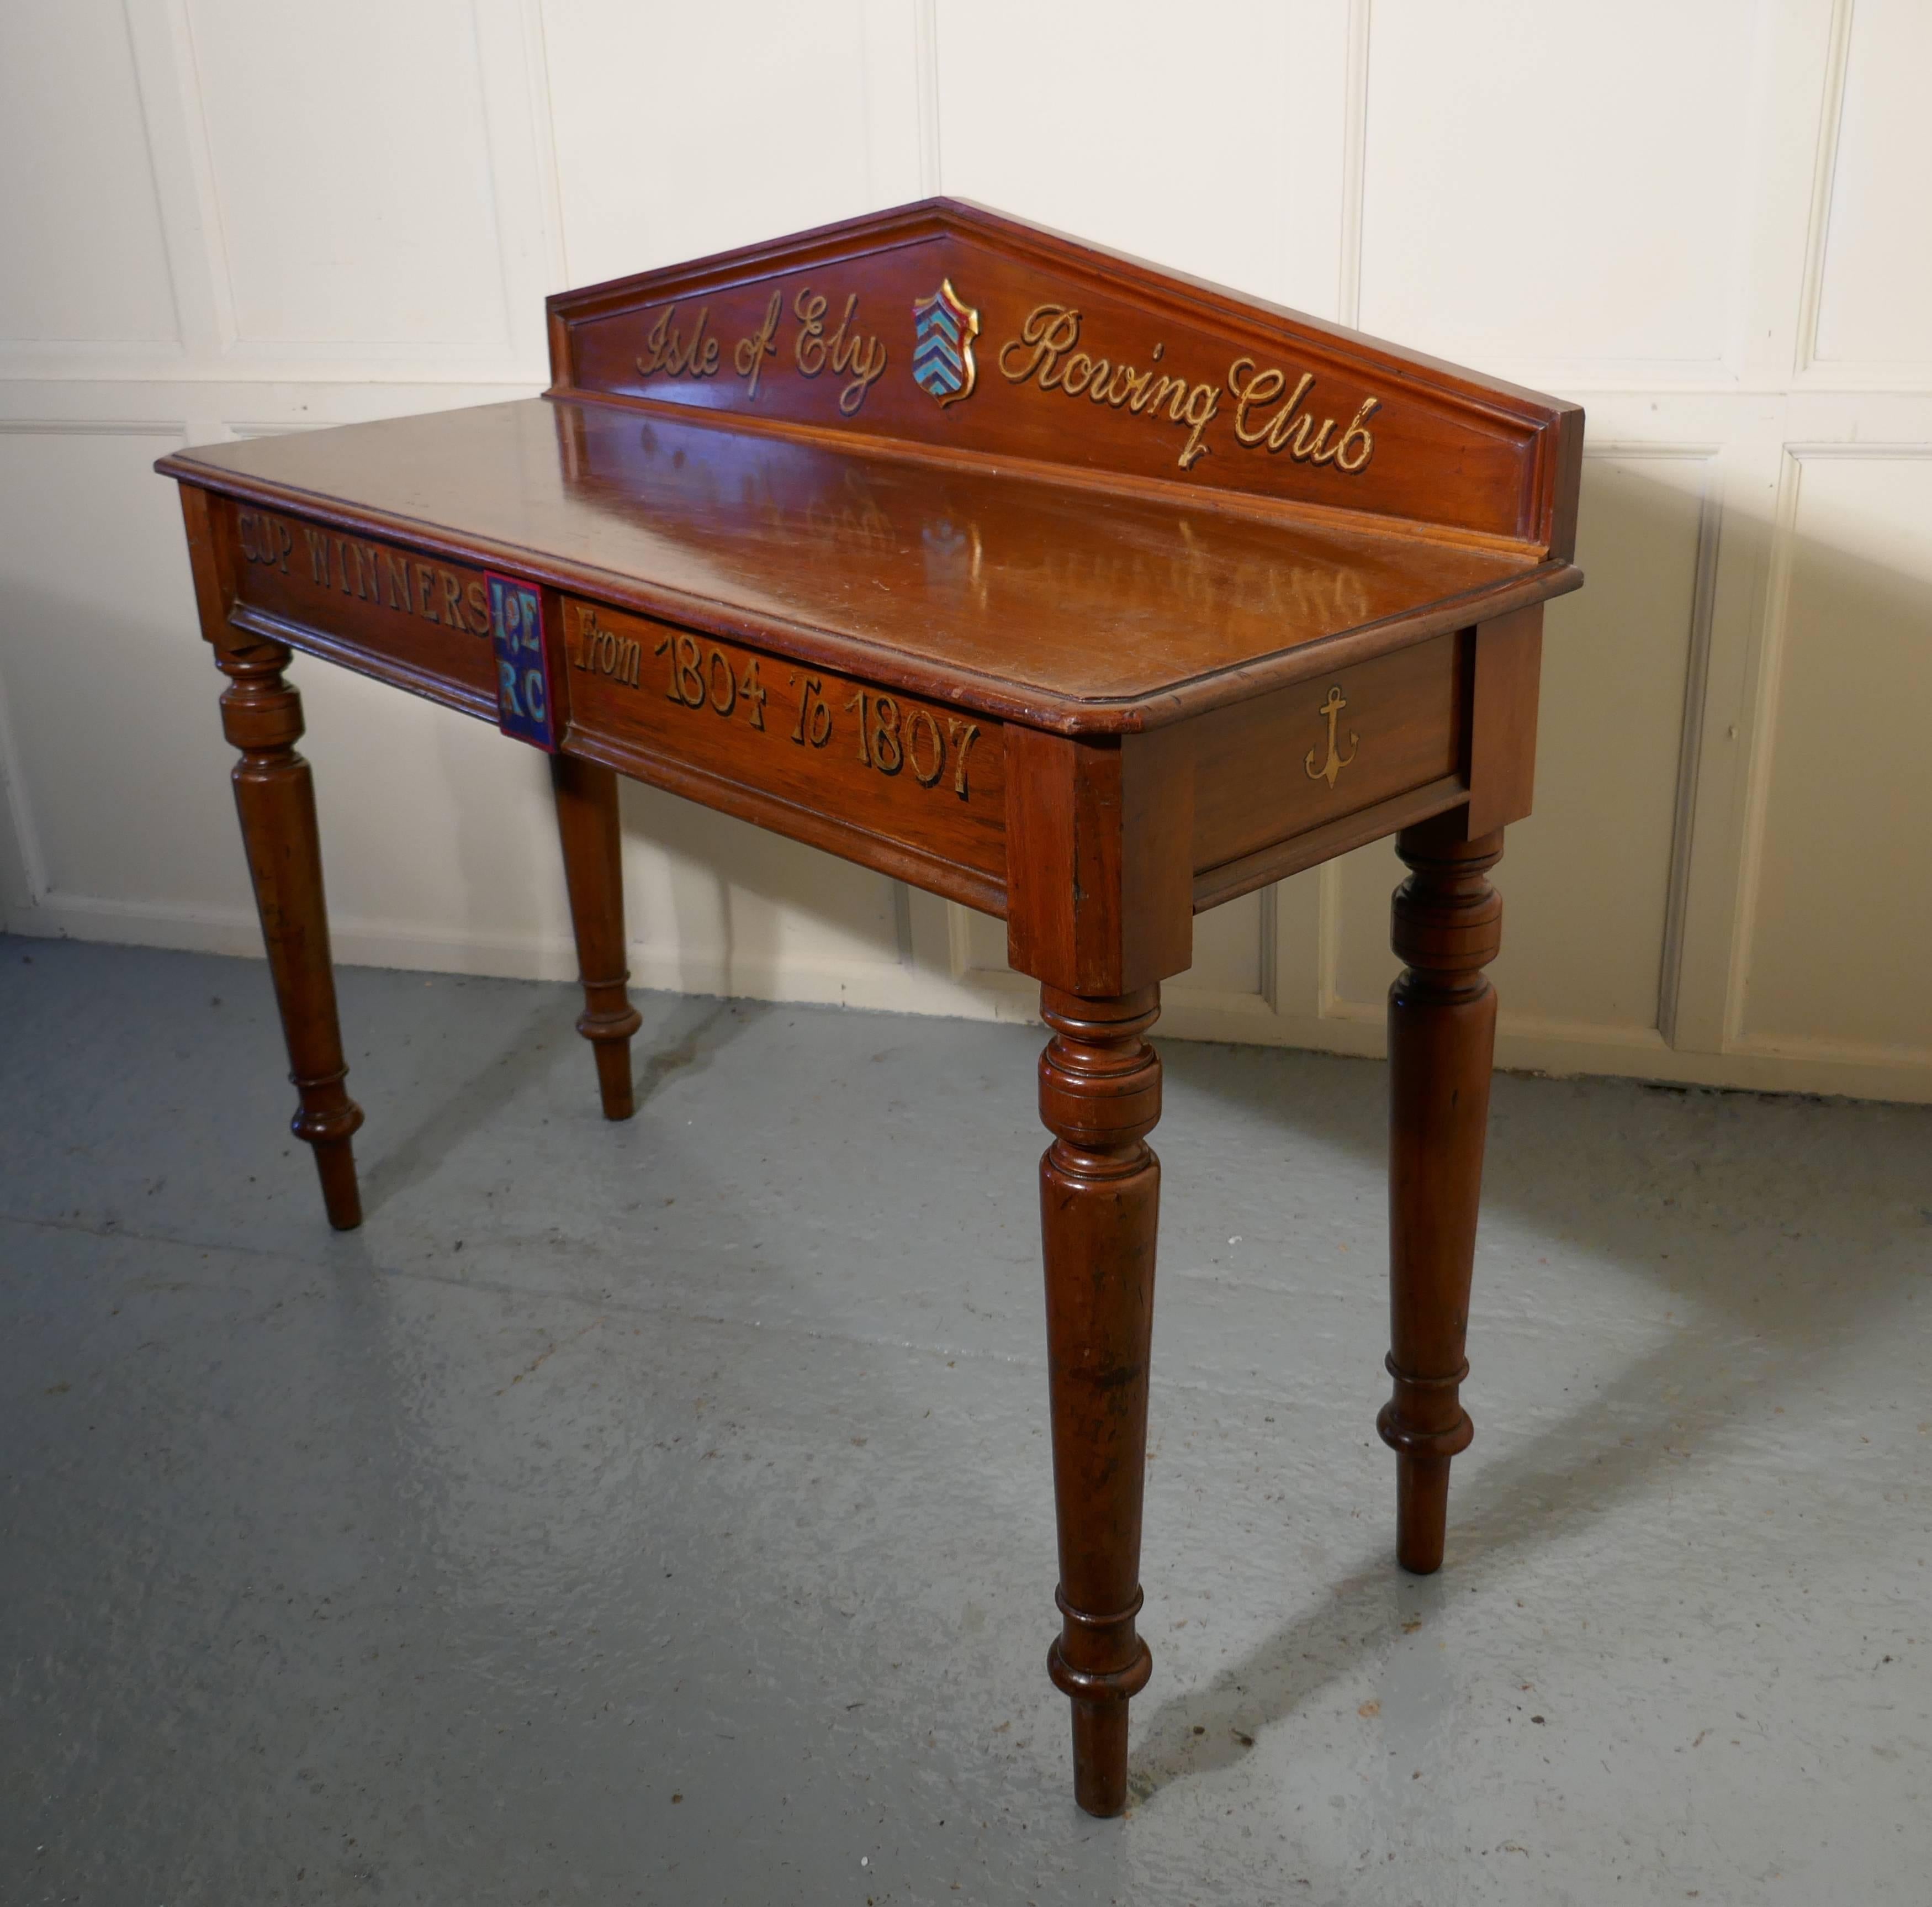 High Victorian Victorian Mahogany Side Table from “Theisle of Ely” Rowing Club